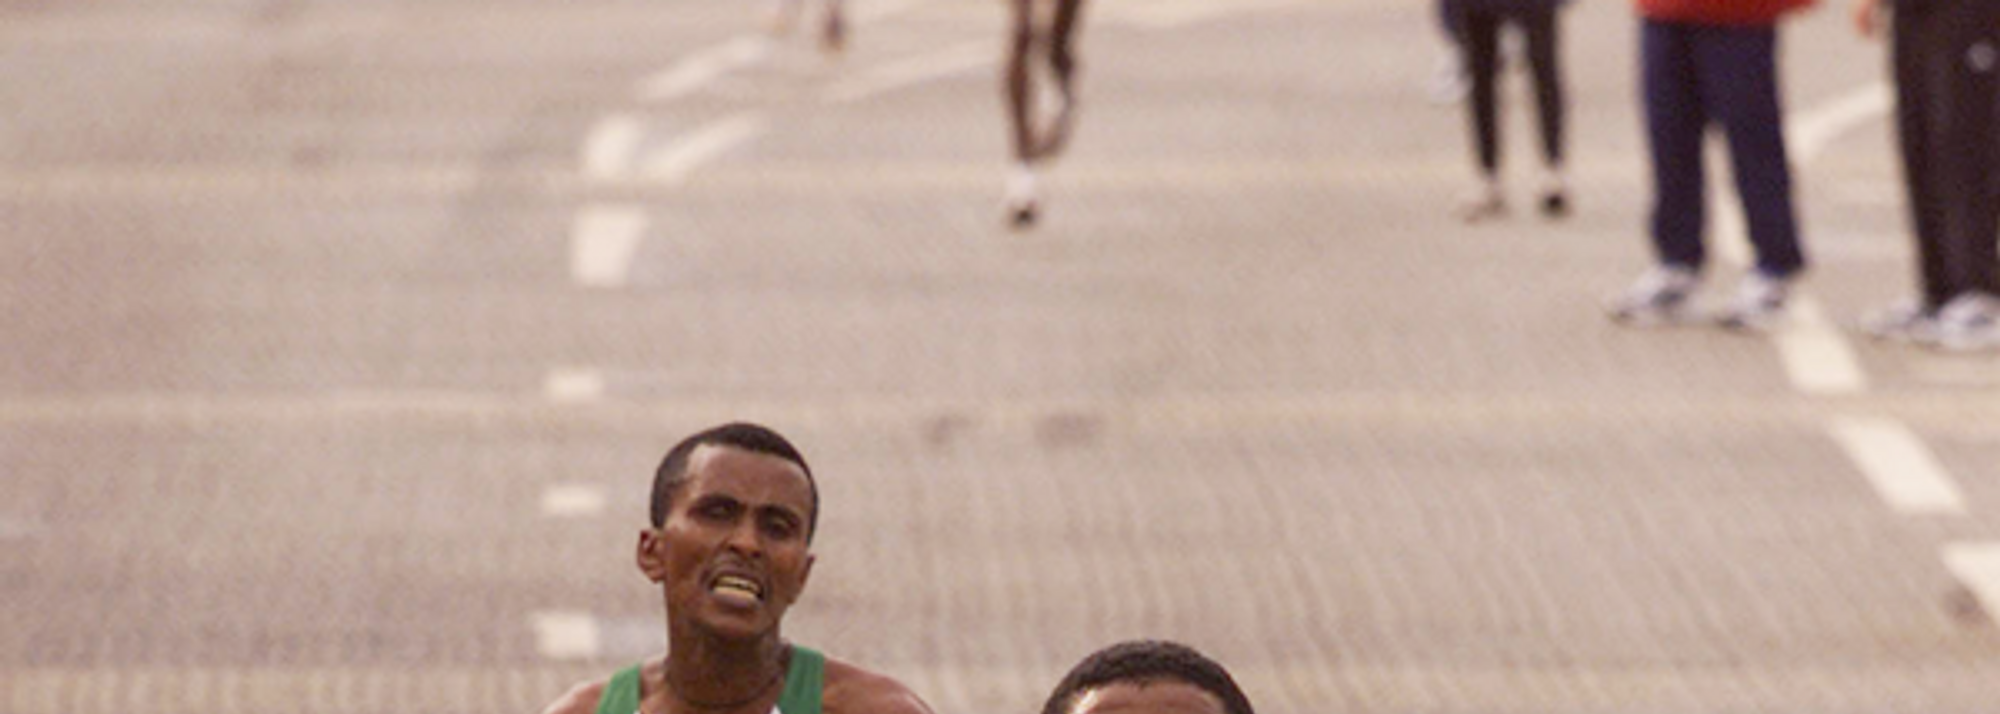 When he lost his 10,000m world title in Edmonton in August, it was the first time since 1993 that Haile Gebrselassie had been unable to call himself “world champion”.